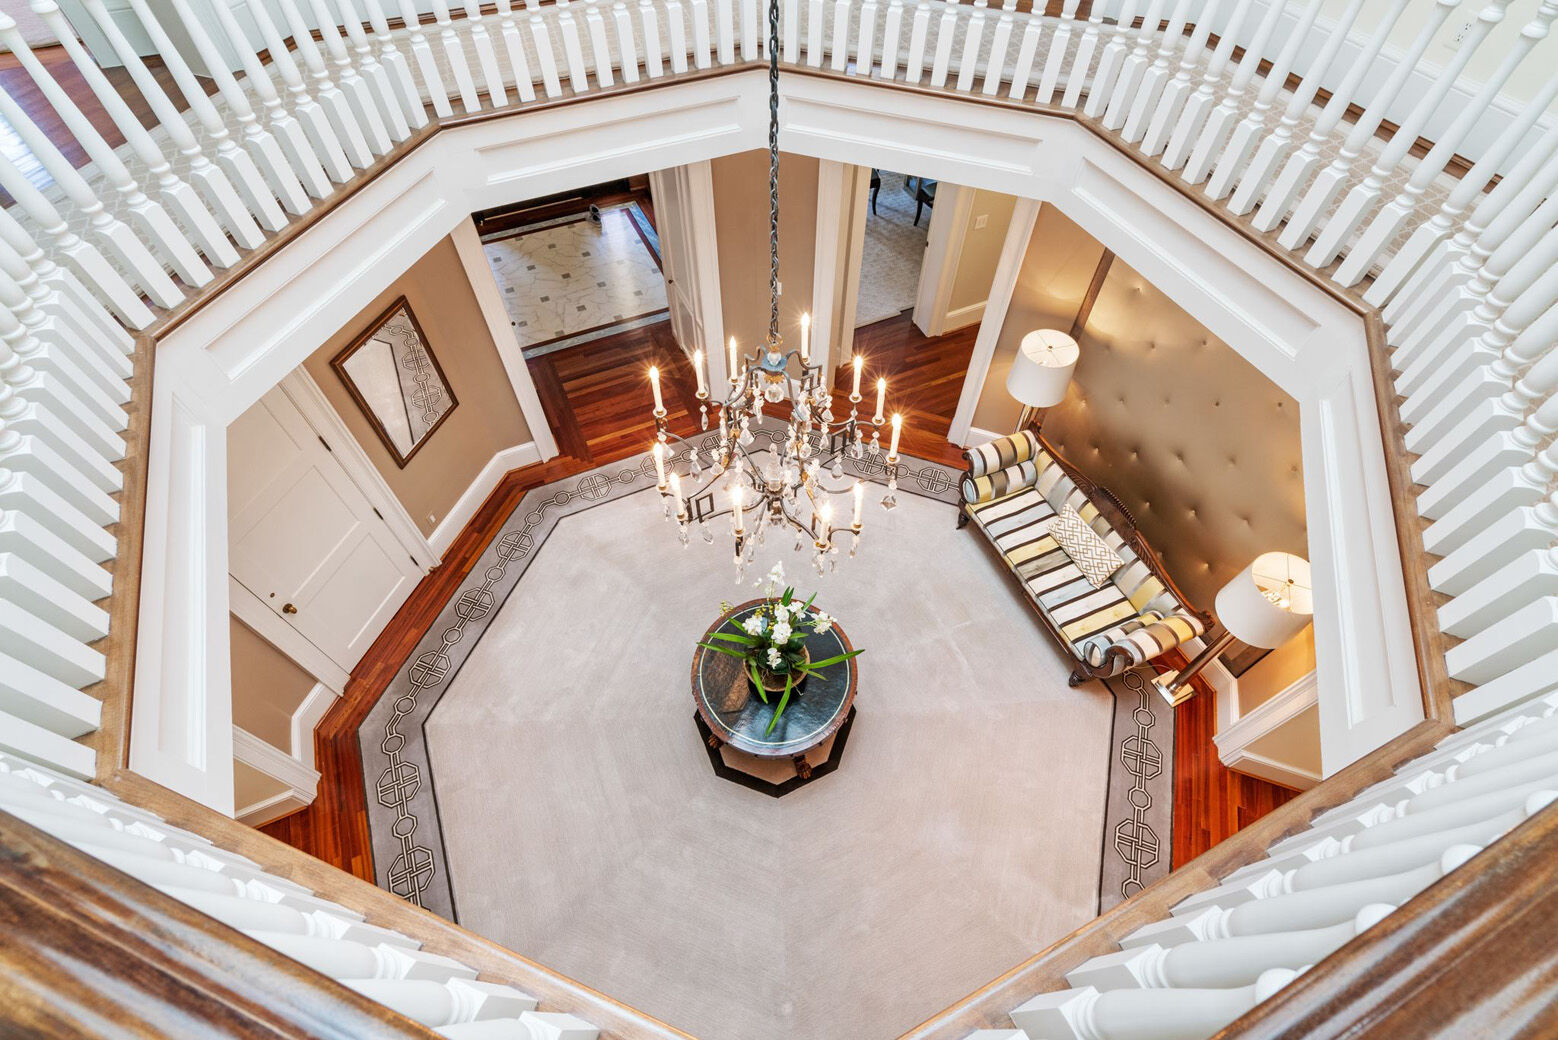 PHOTOS: DC sports magnate Ted Leonsis' $14.7 million former McLean